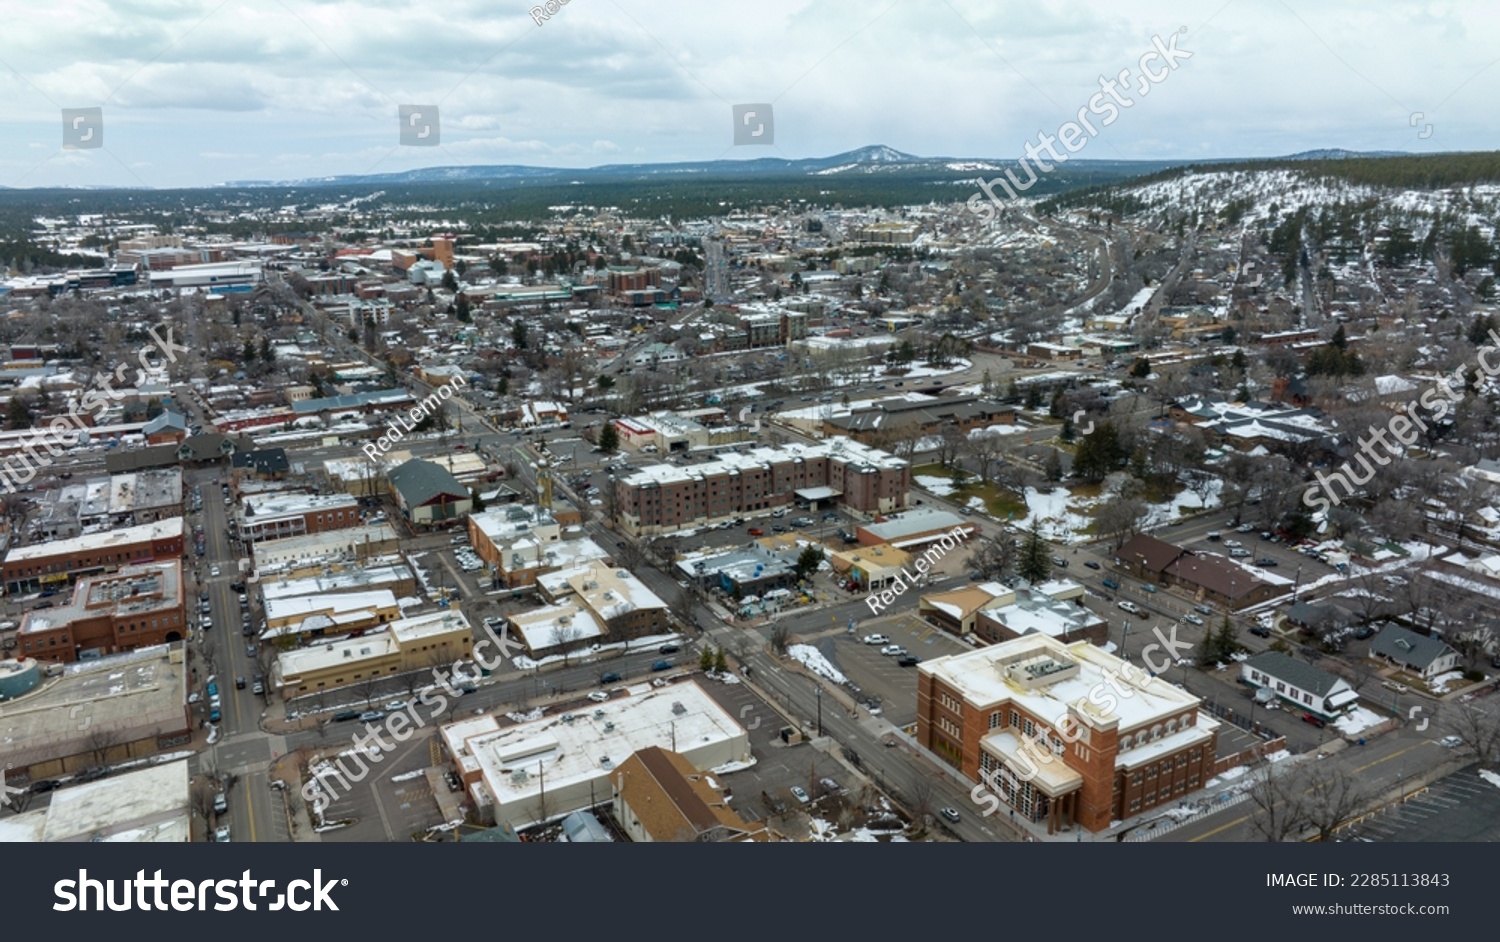 Aerial view of downtown Flagstaff in Arizona. #2285113843